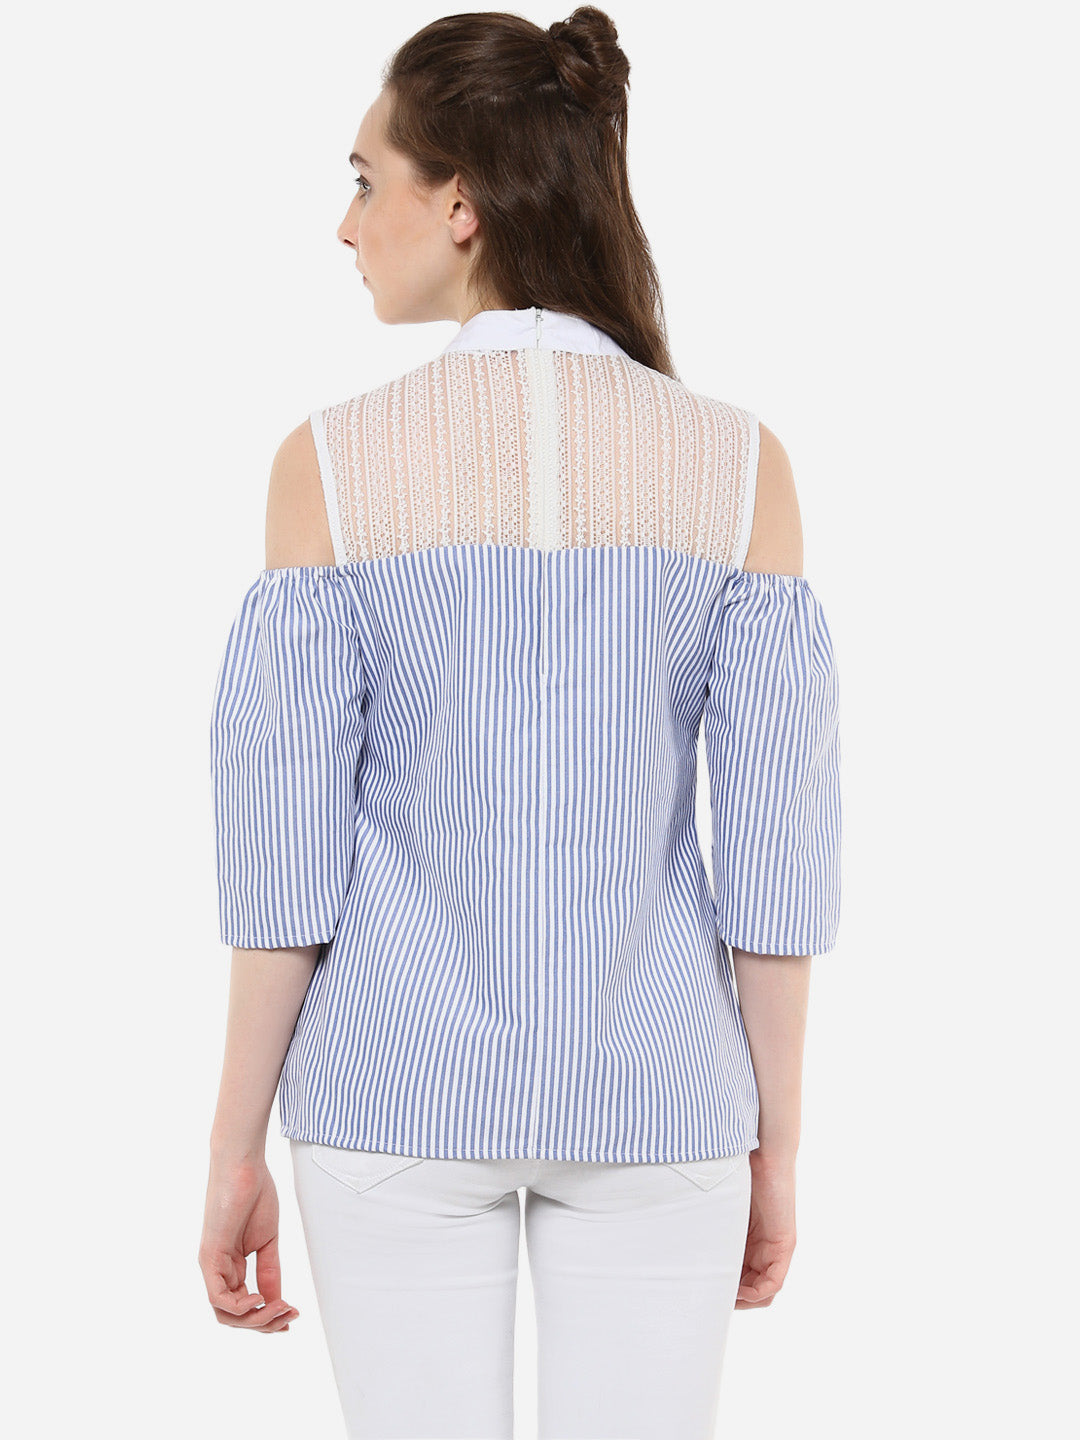 Women's Blue and White Stripe top with Lace detailing